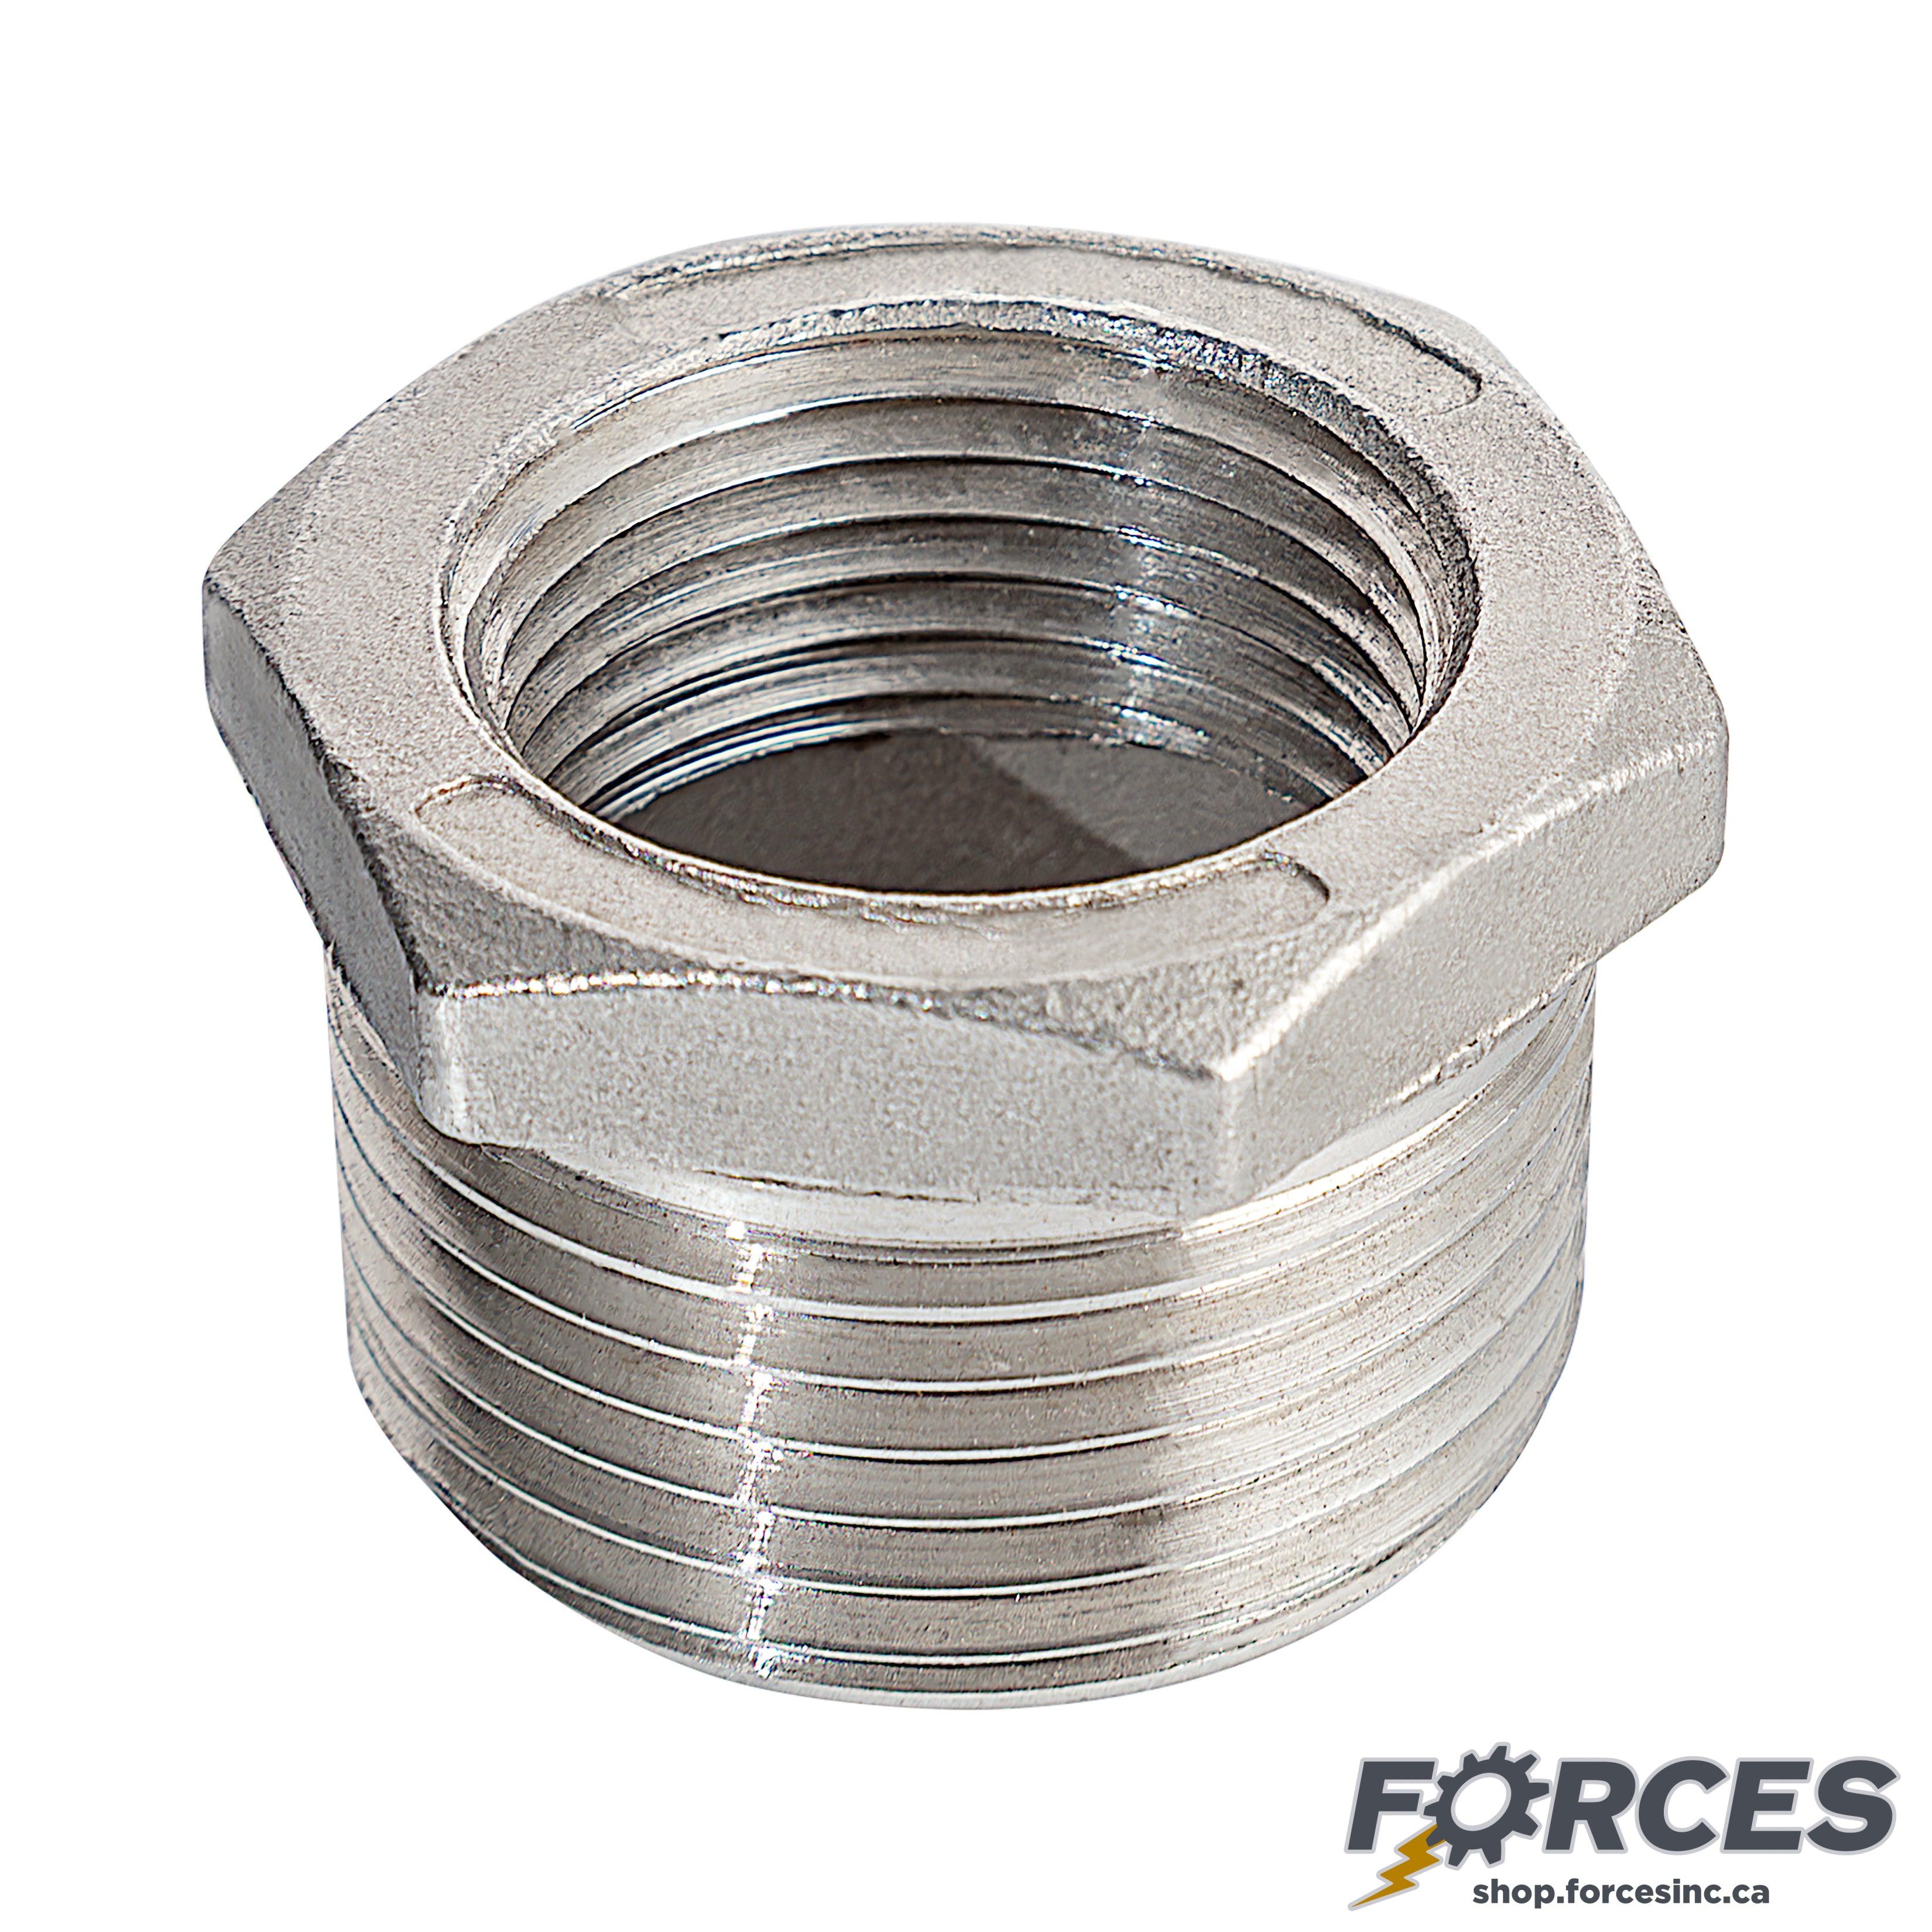 1/4" (M) x 1/8" (F) Reducing Hex Bushing NPT #150 - Stainless Steel 316 - Forces Inc